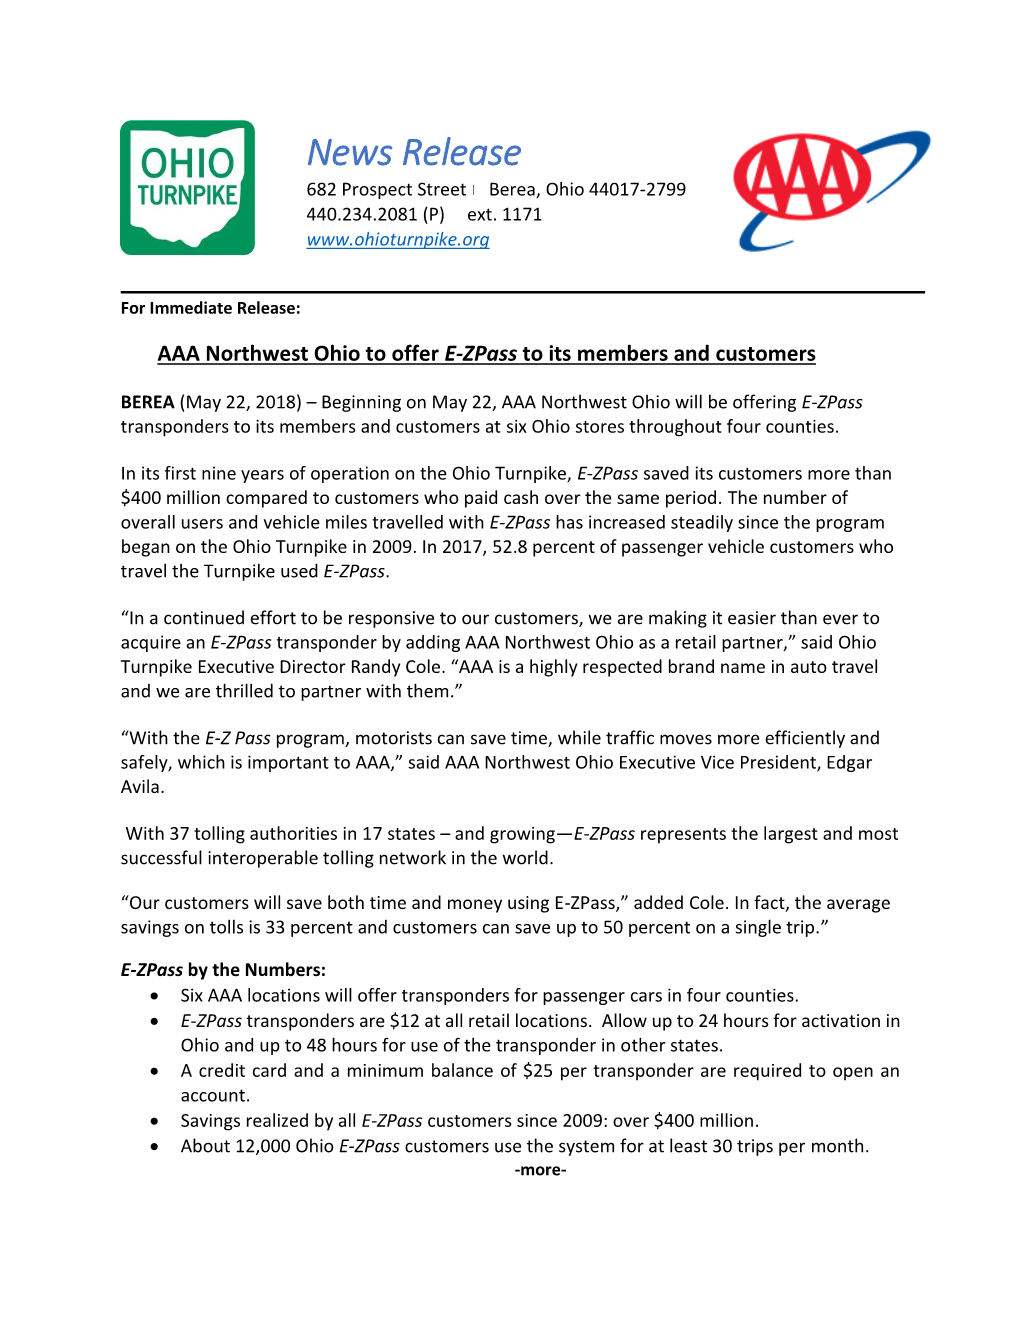 AAA Northwest Ohio to Offer E-Zpass to Its Members and Customers